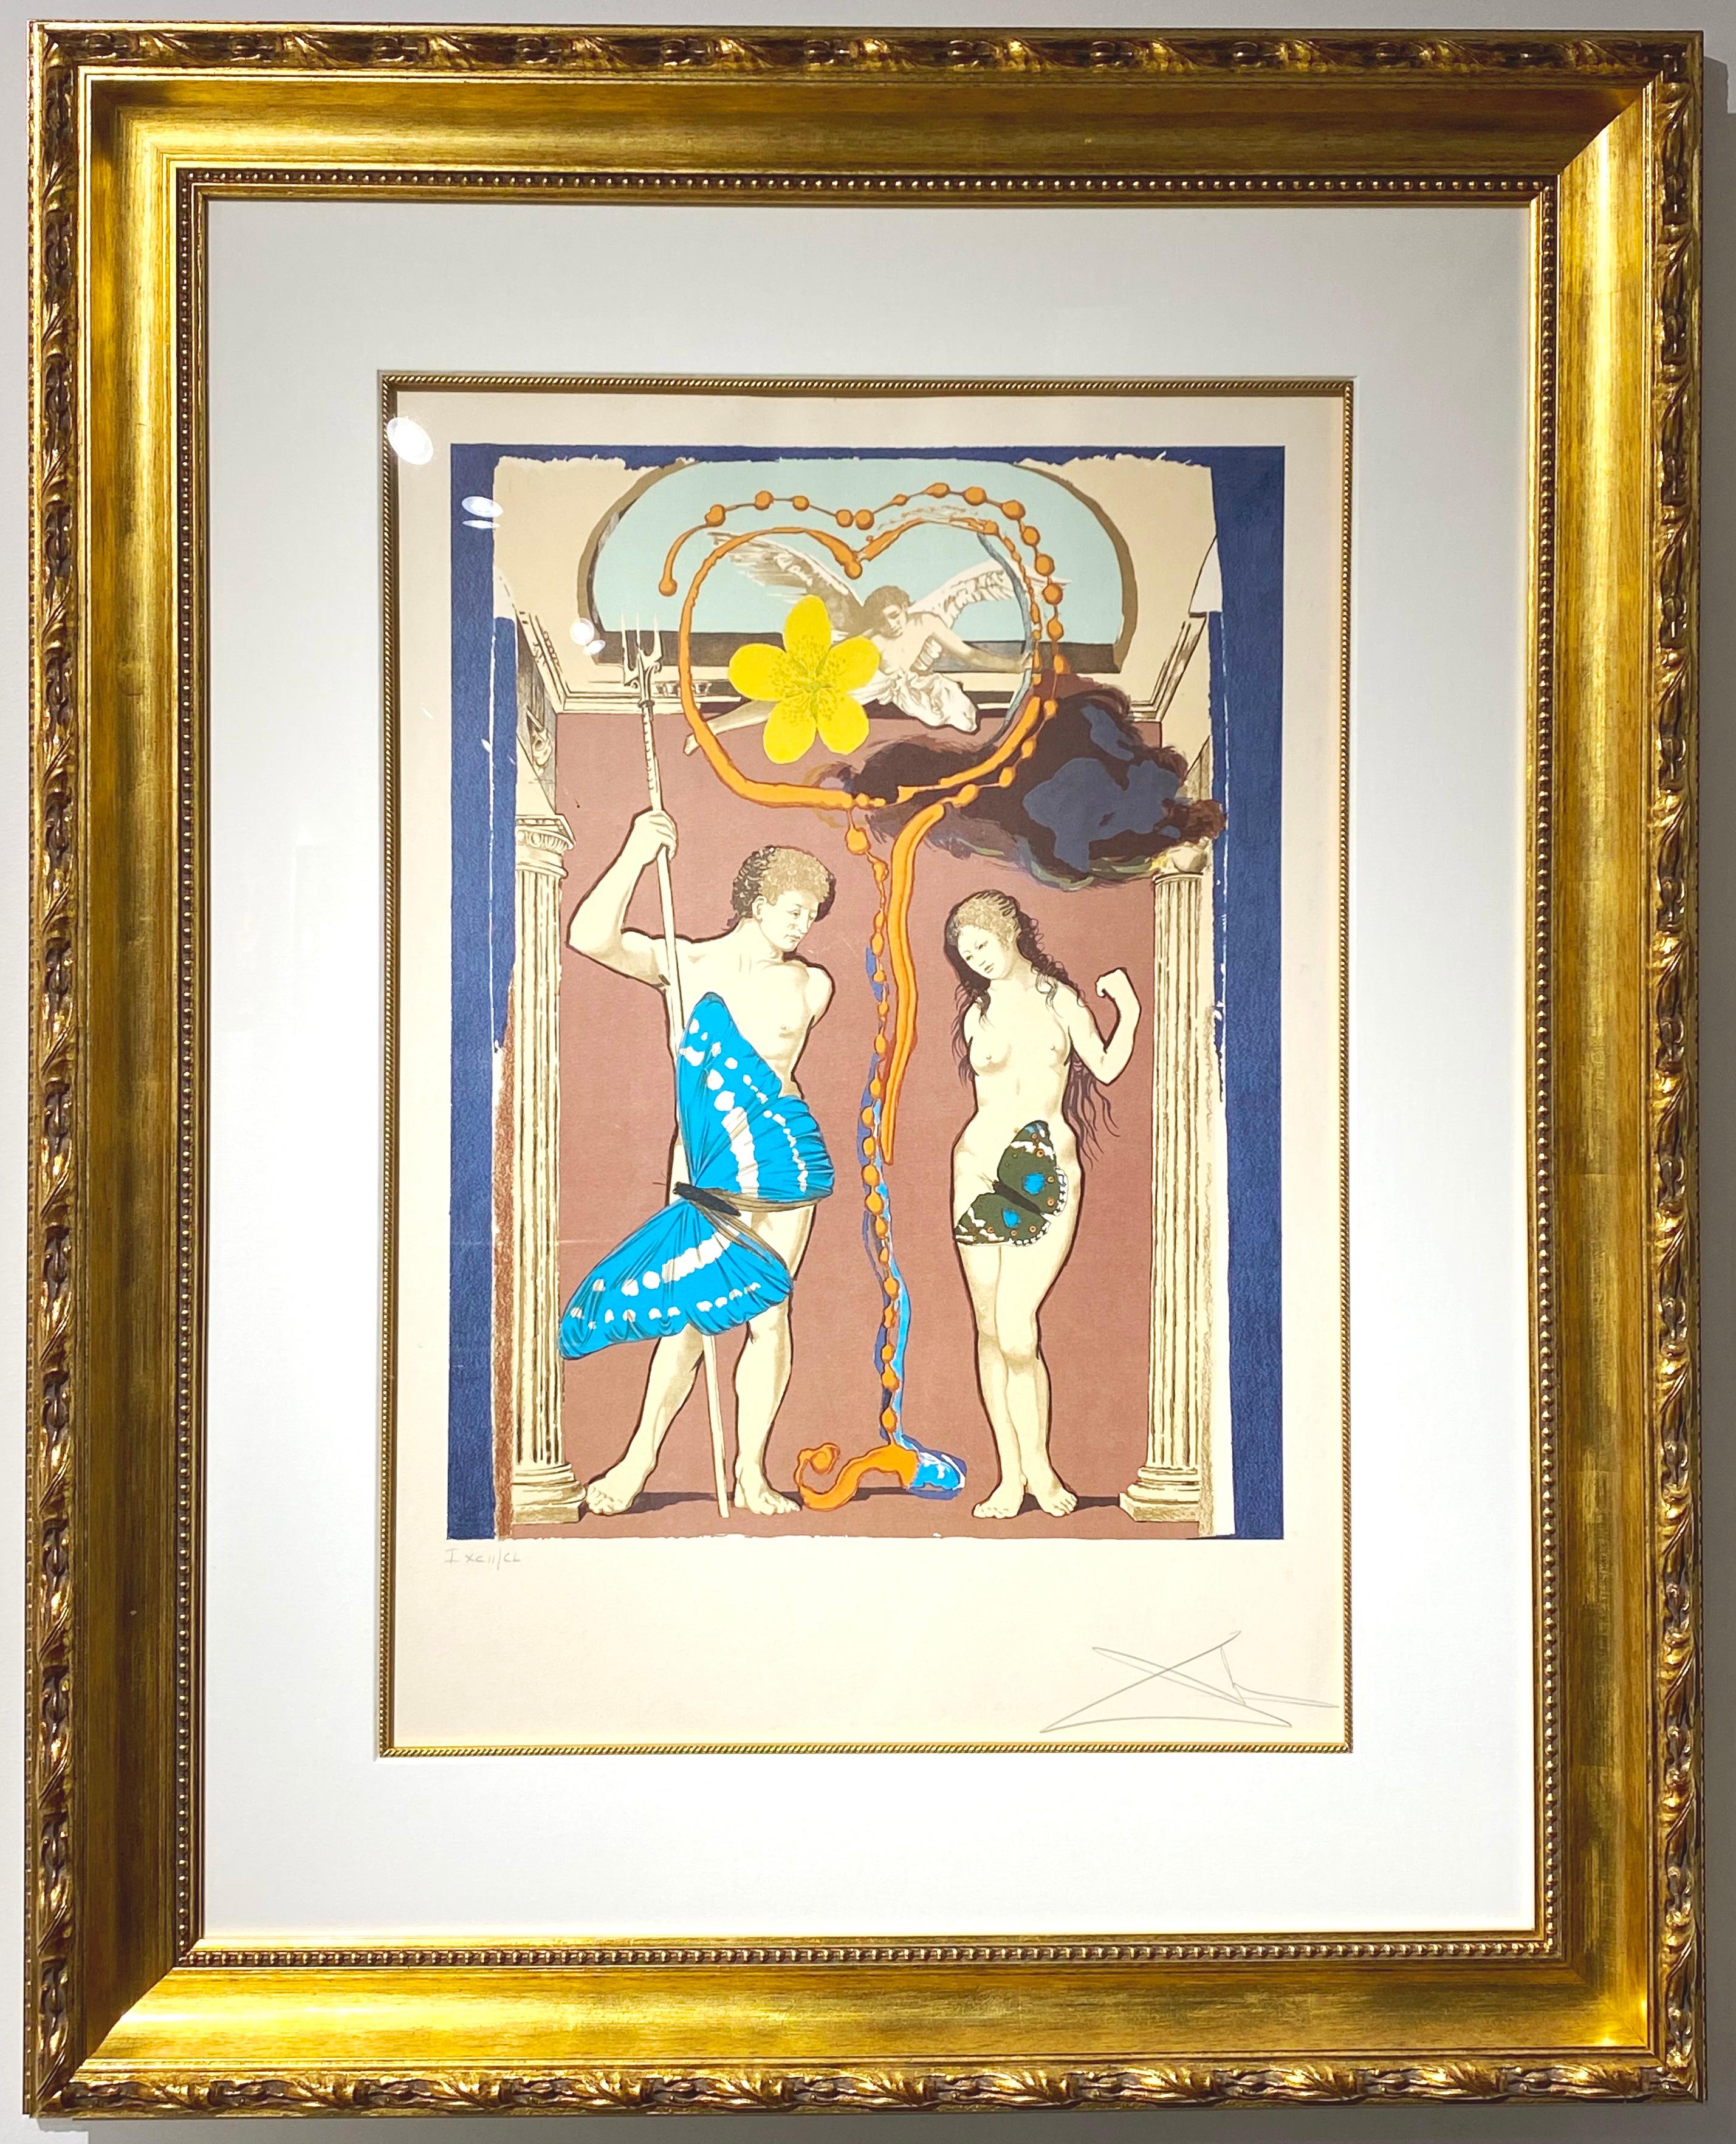  Salvador Dali "Judgment from Triumph of Love" - Print by Salvador Dalí